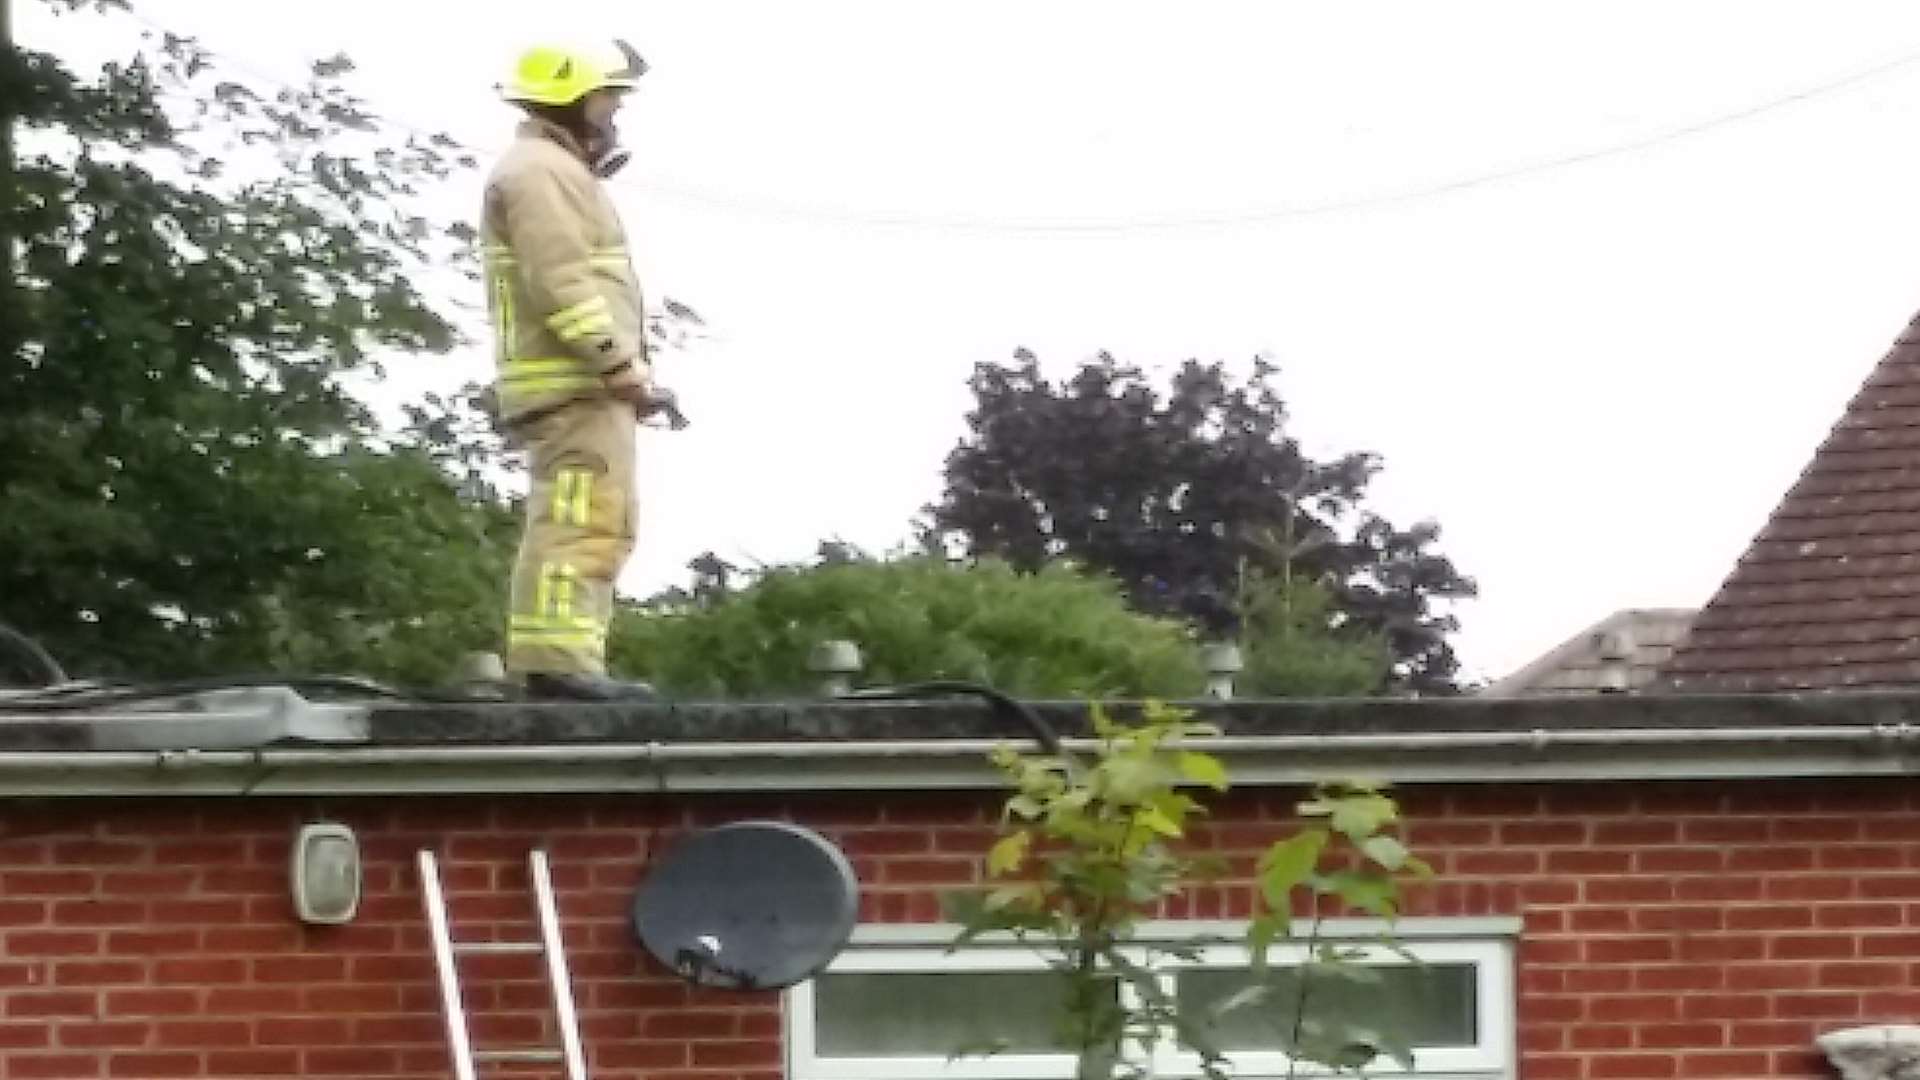 Fire officers dealing with the blaze